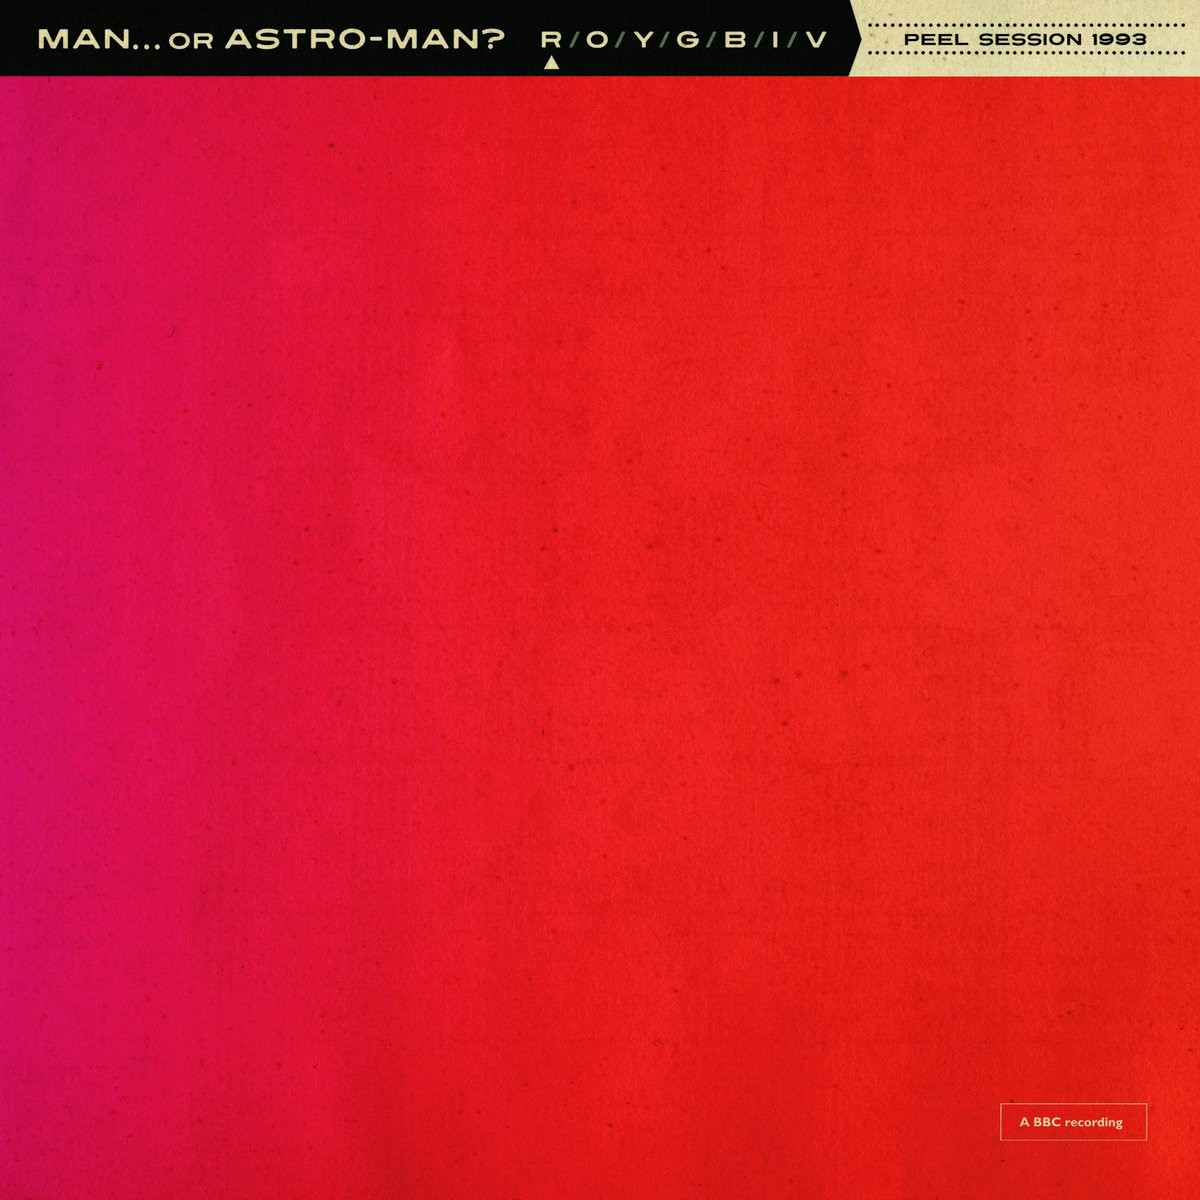 Man Or Astro Man - Peel Session 1993 - 7 inch